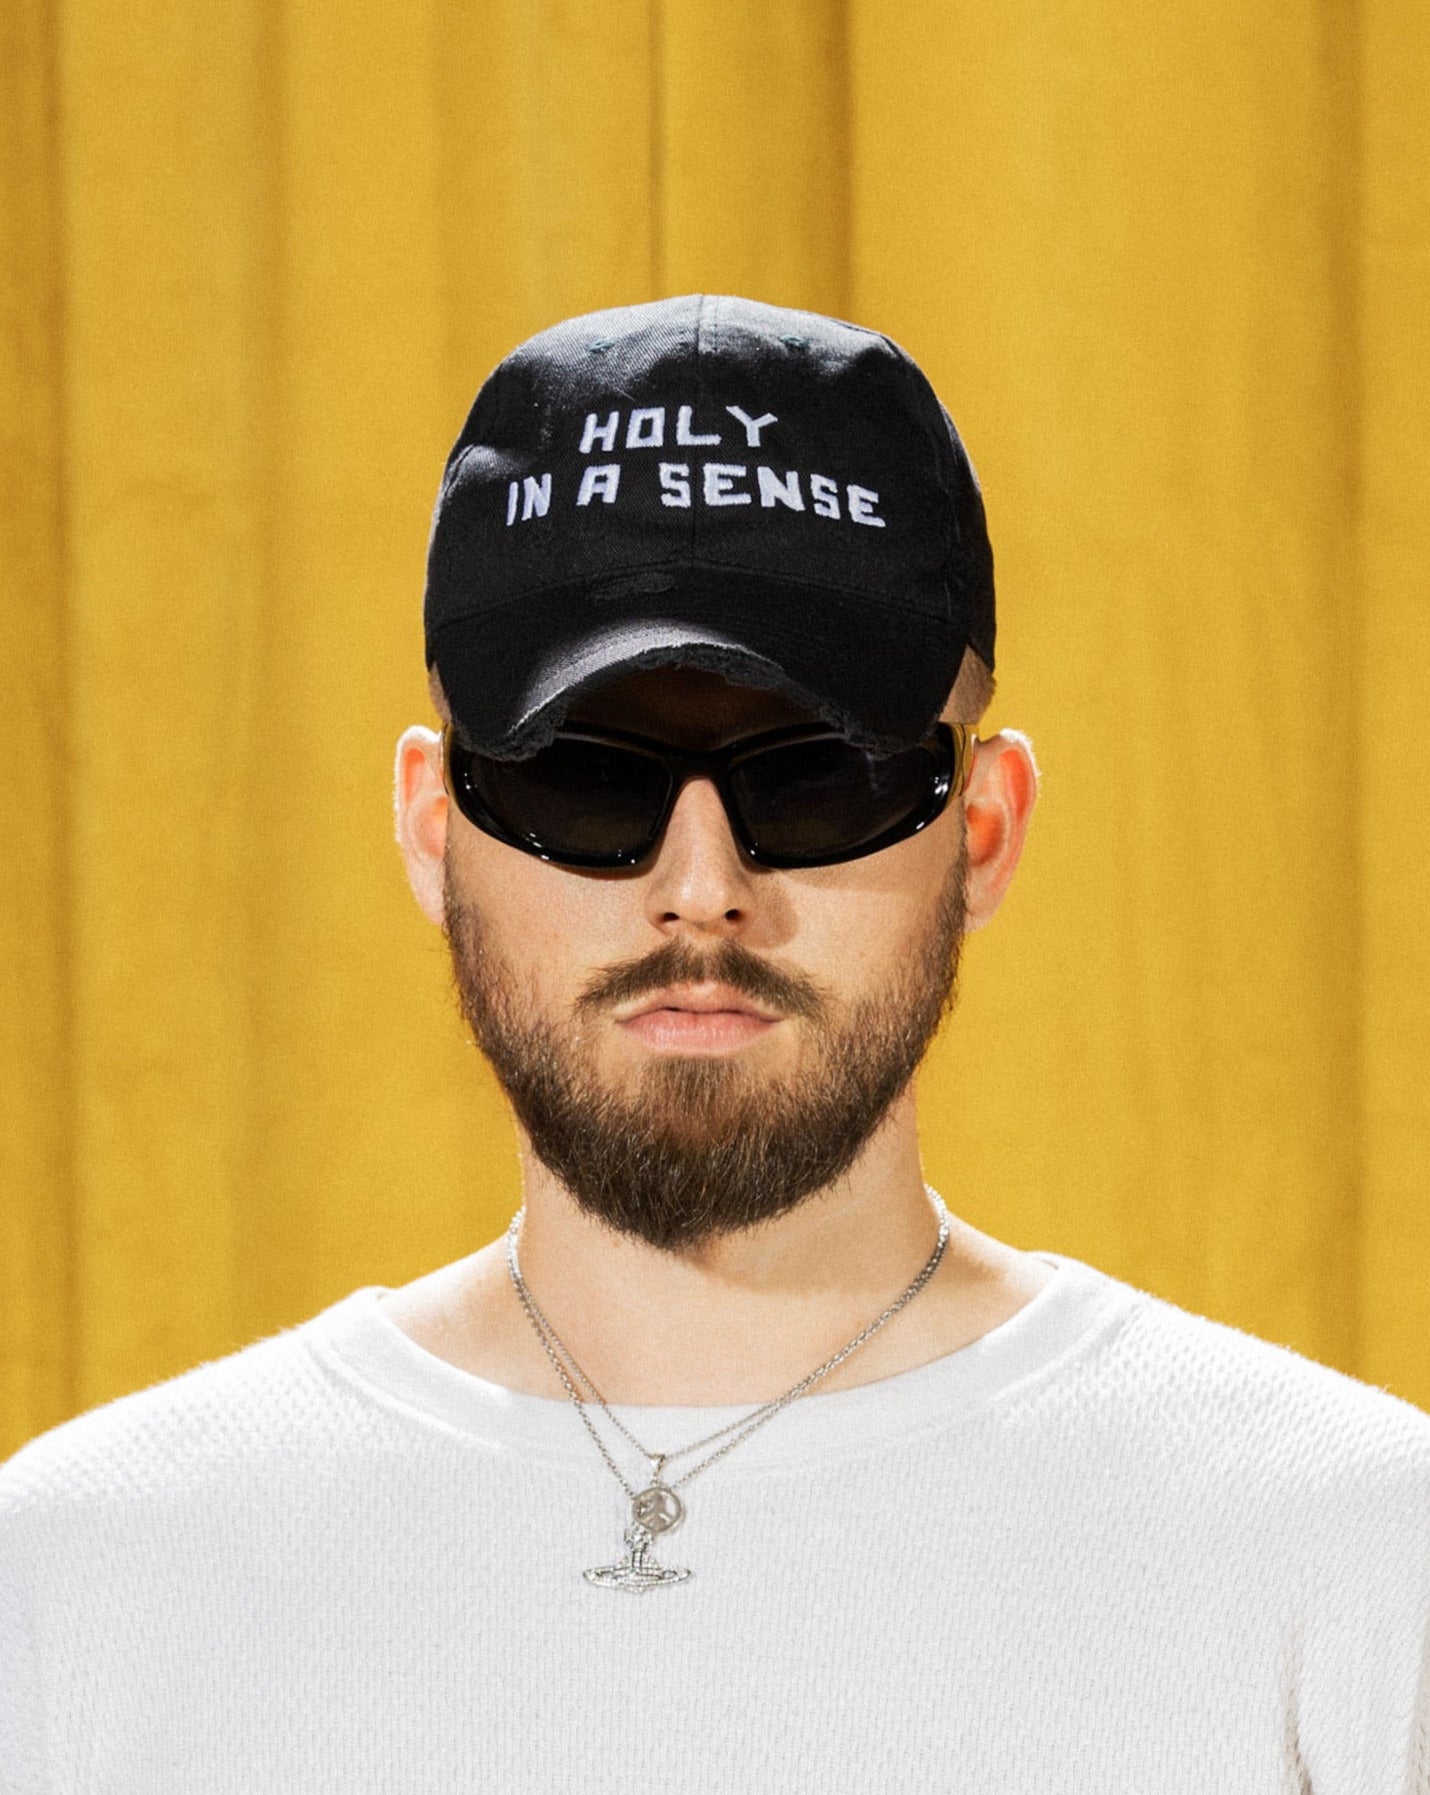 "HOLY IN A SENSE" DISTRESSED DAD HAT